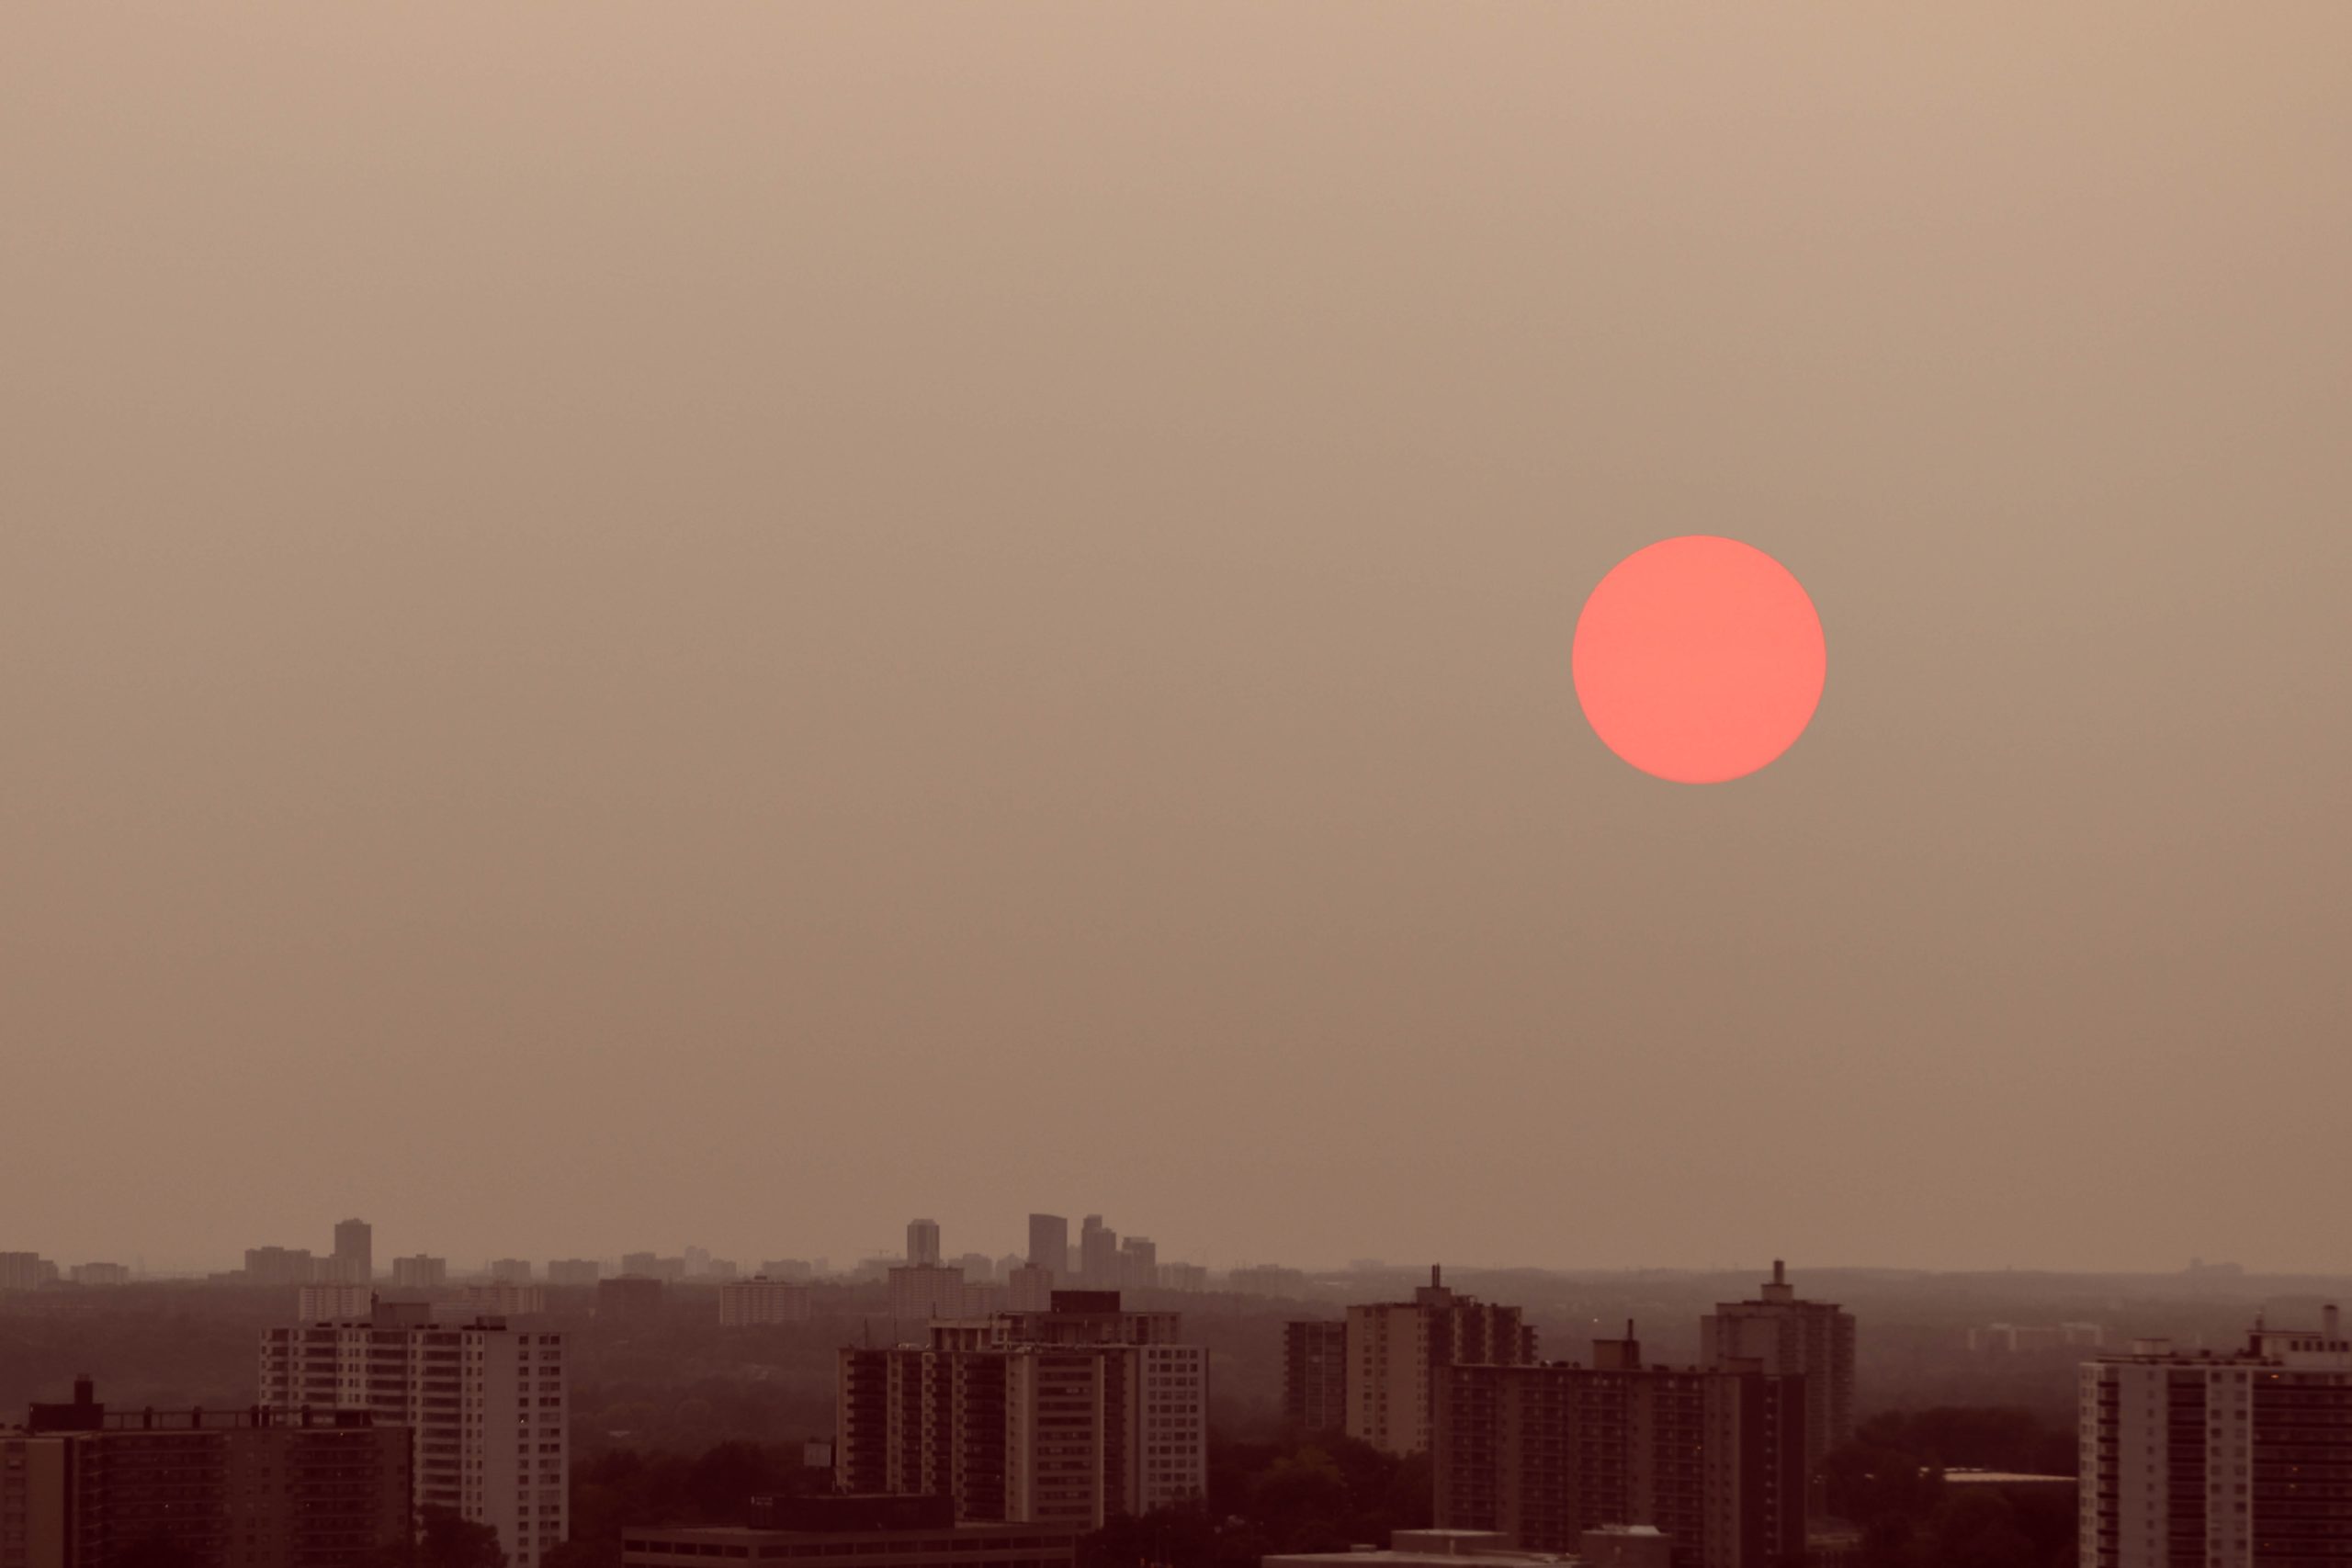 The sun is a matte, neon pink in a hazy brown sky over a smoky city skyline.